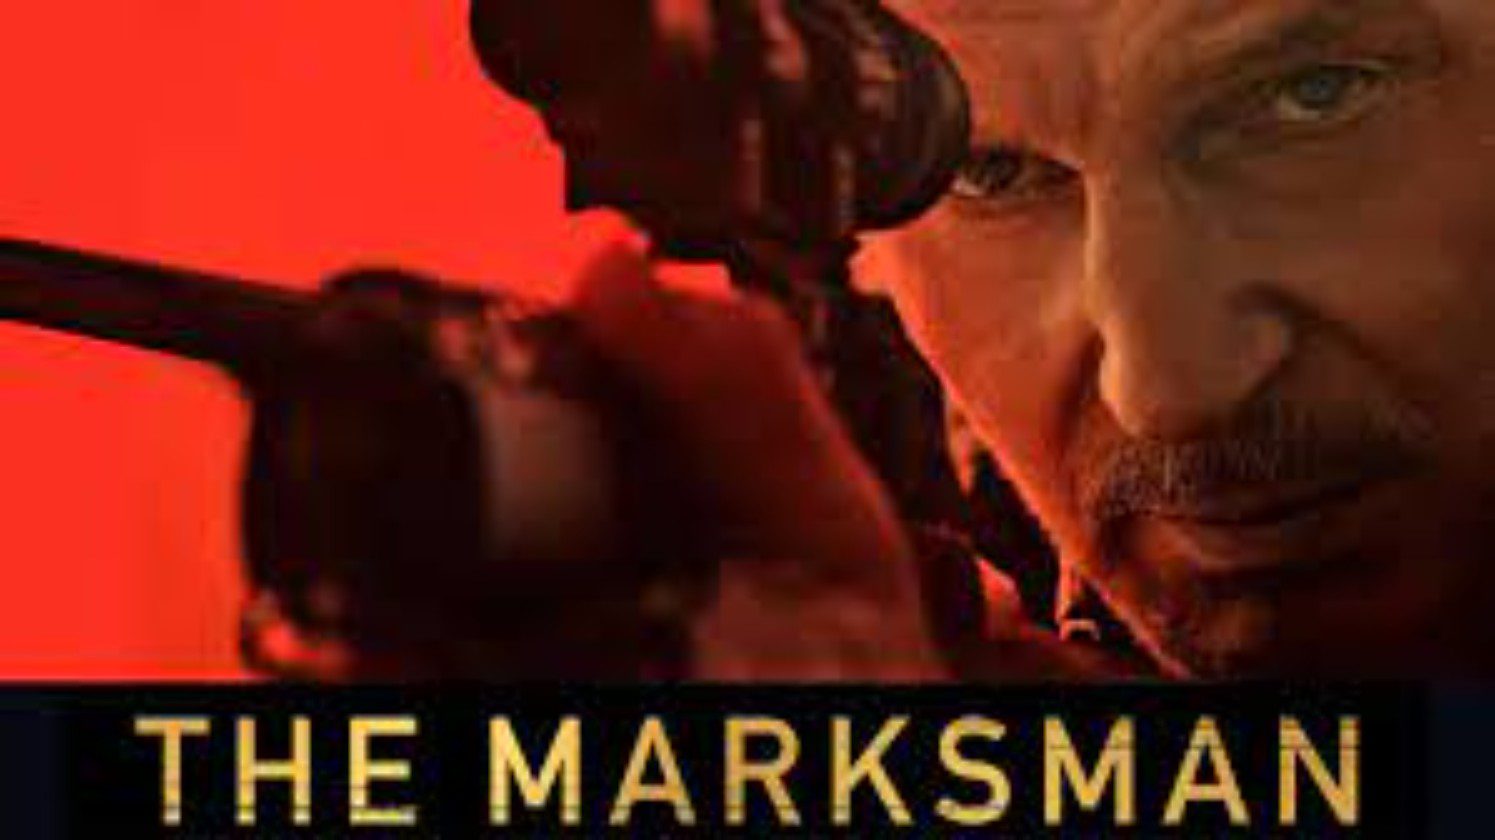 The Marksman Release Date